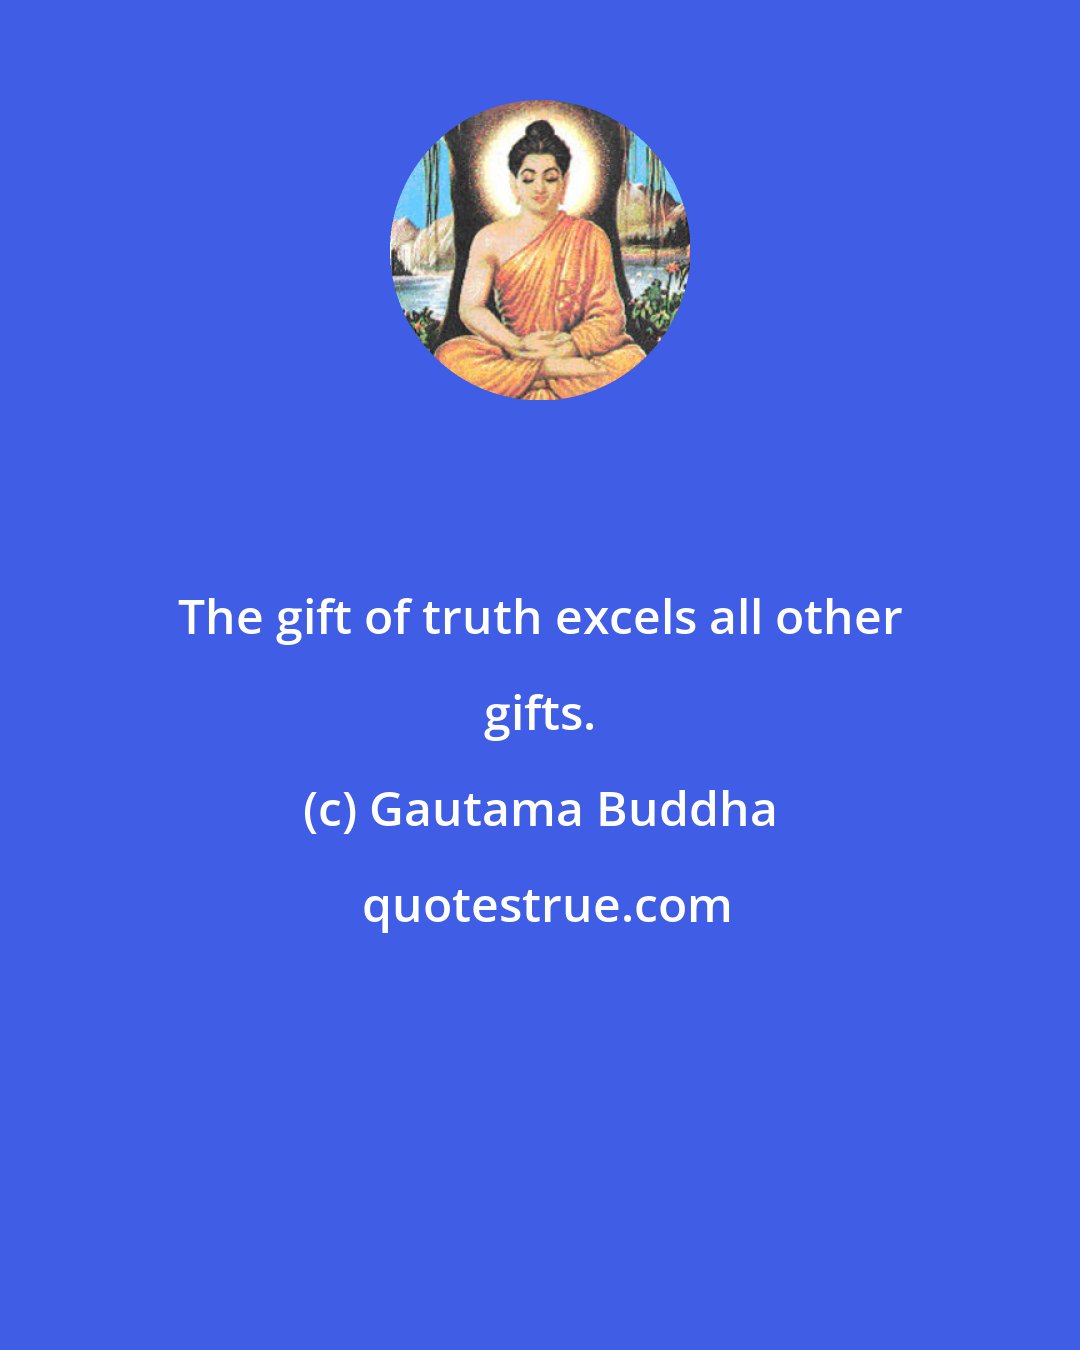 Gautama Buddha: The gift of truth excels all other gifts.